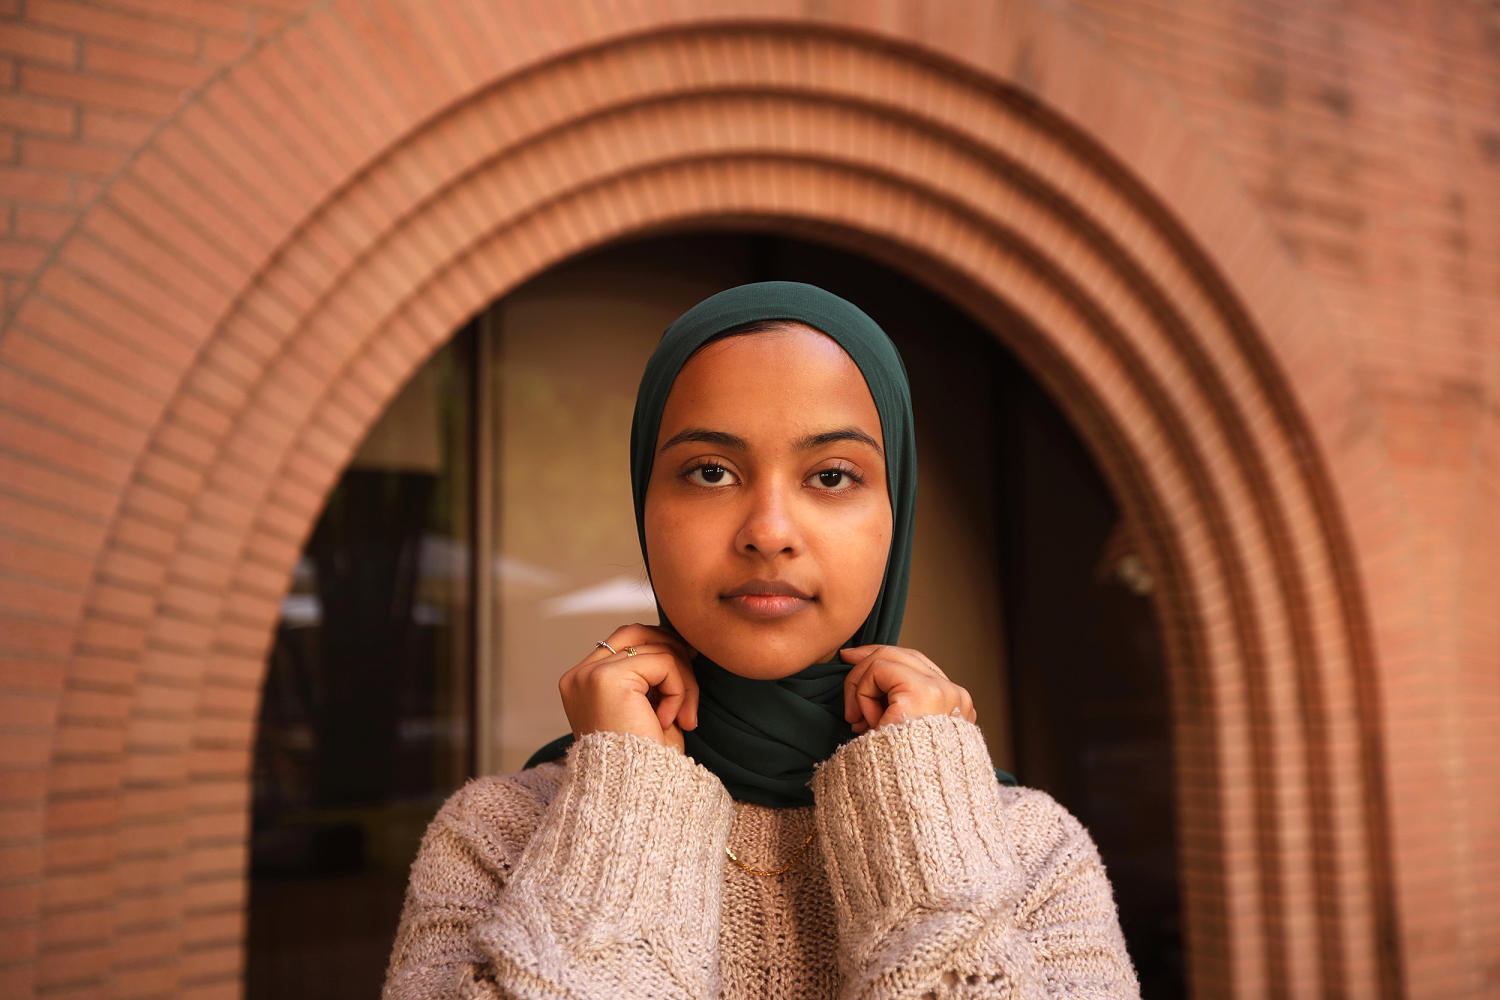 USC canceling Muslim valedictorian’s speech inflames tensions on campus